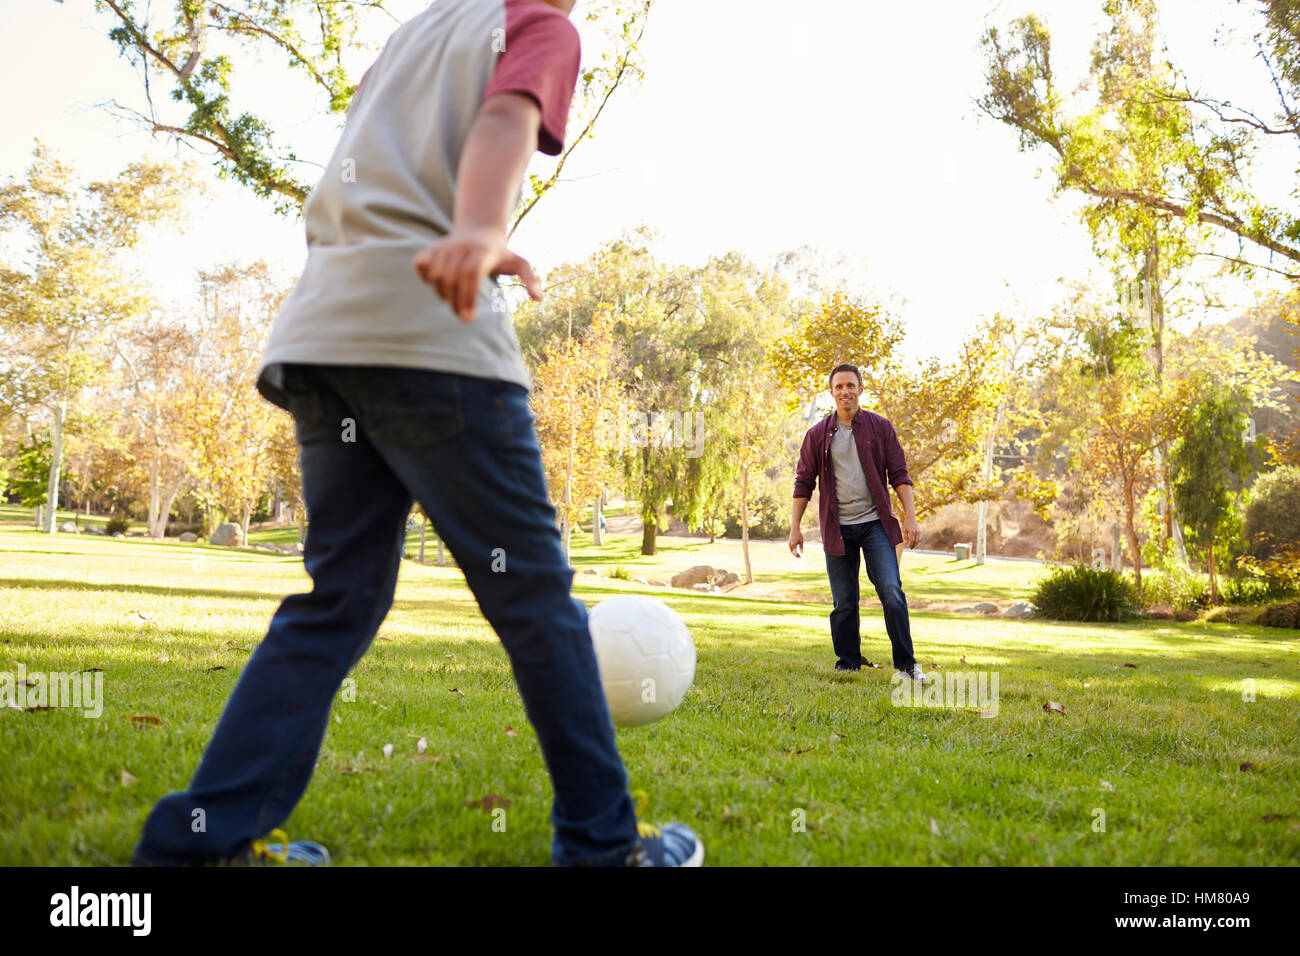 Seven year old boy kicking football to his dad in park, crop Stock Photo